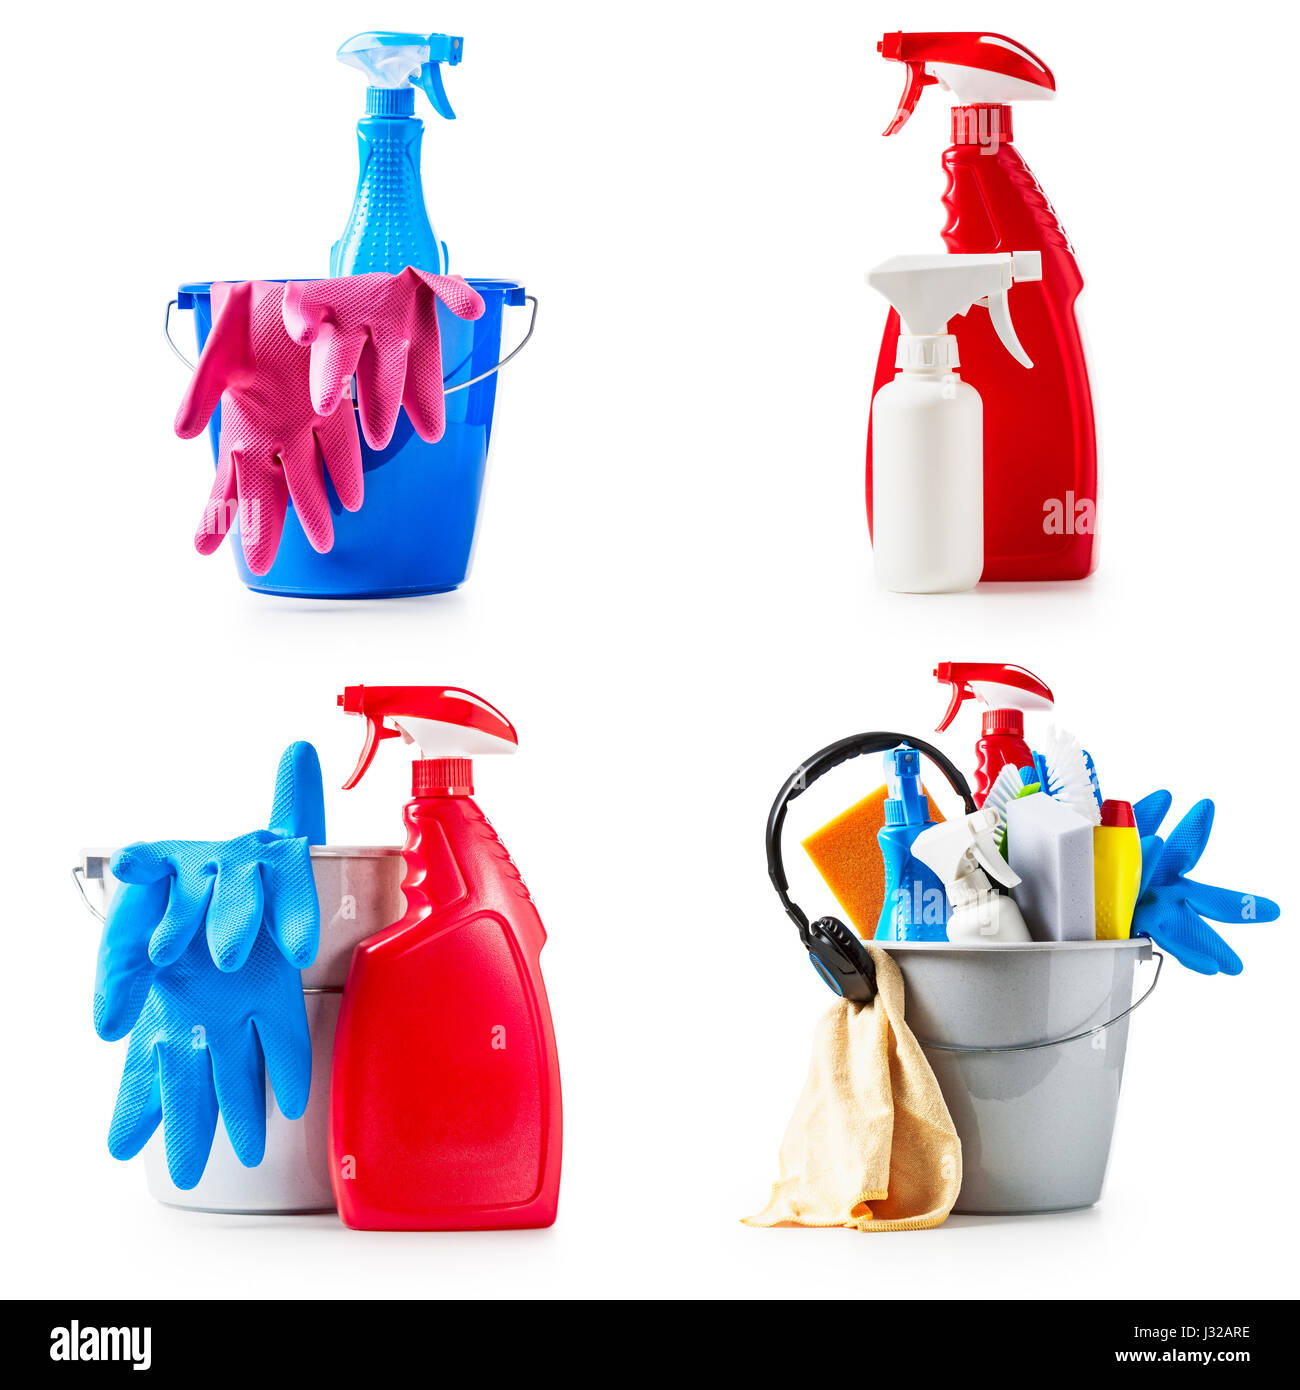 Bucket with cleaning supplies and products collection isolated on white background Stock Photo